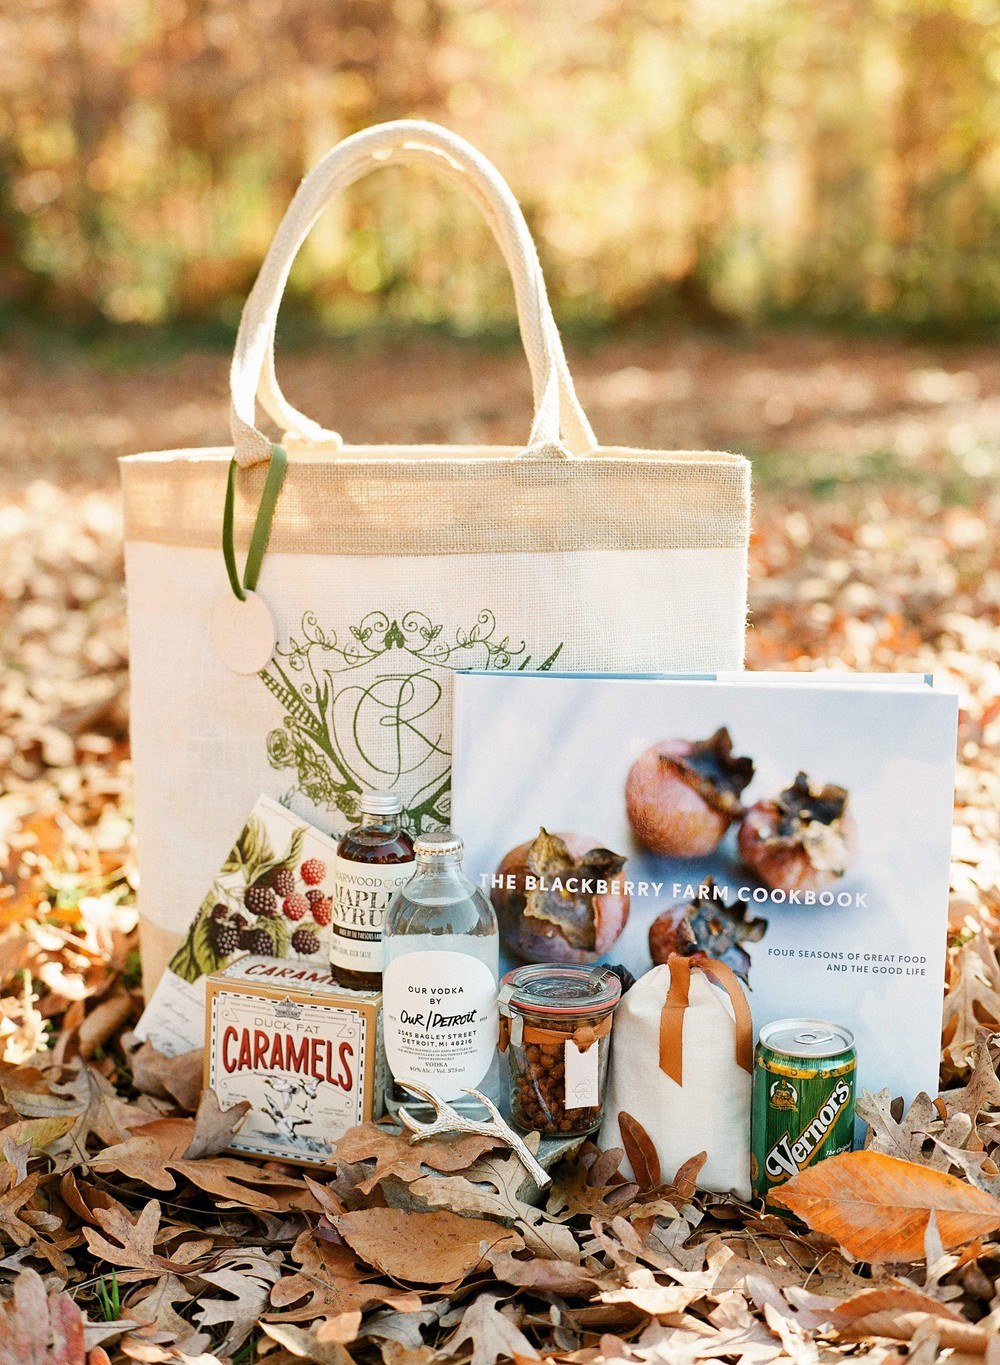 Wow Guests With These 7 Unique Wedding Welcome Bag Ideas